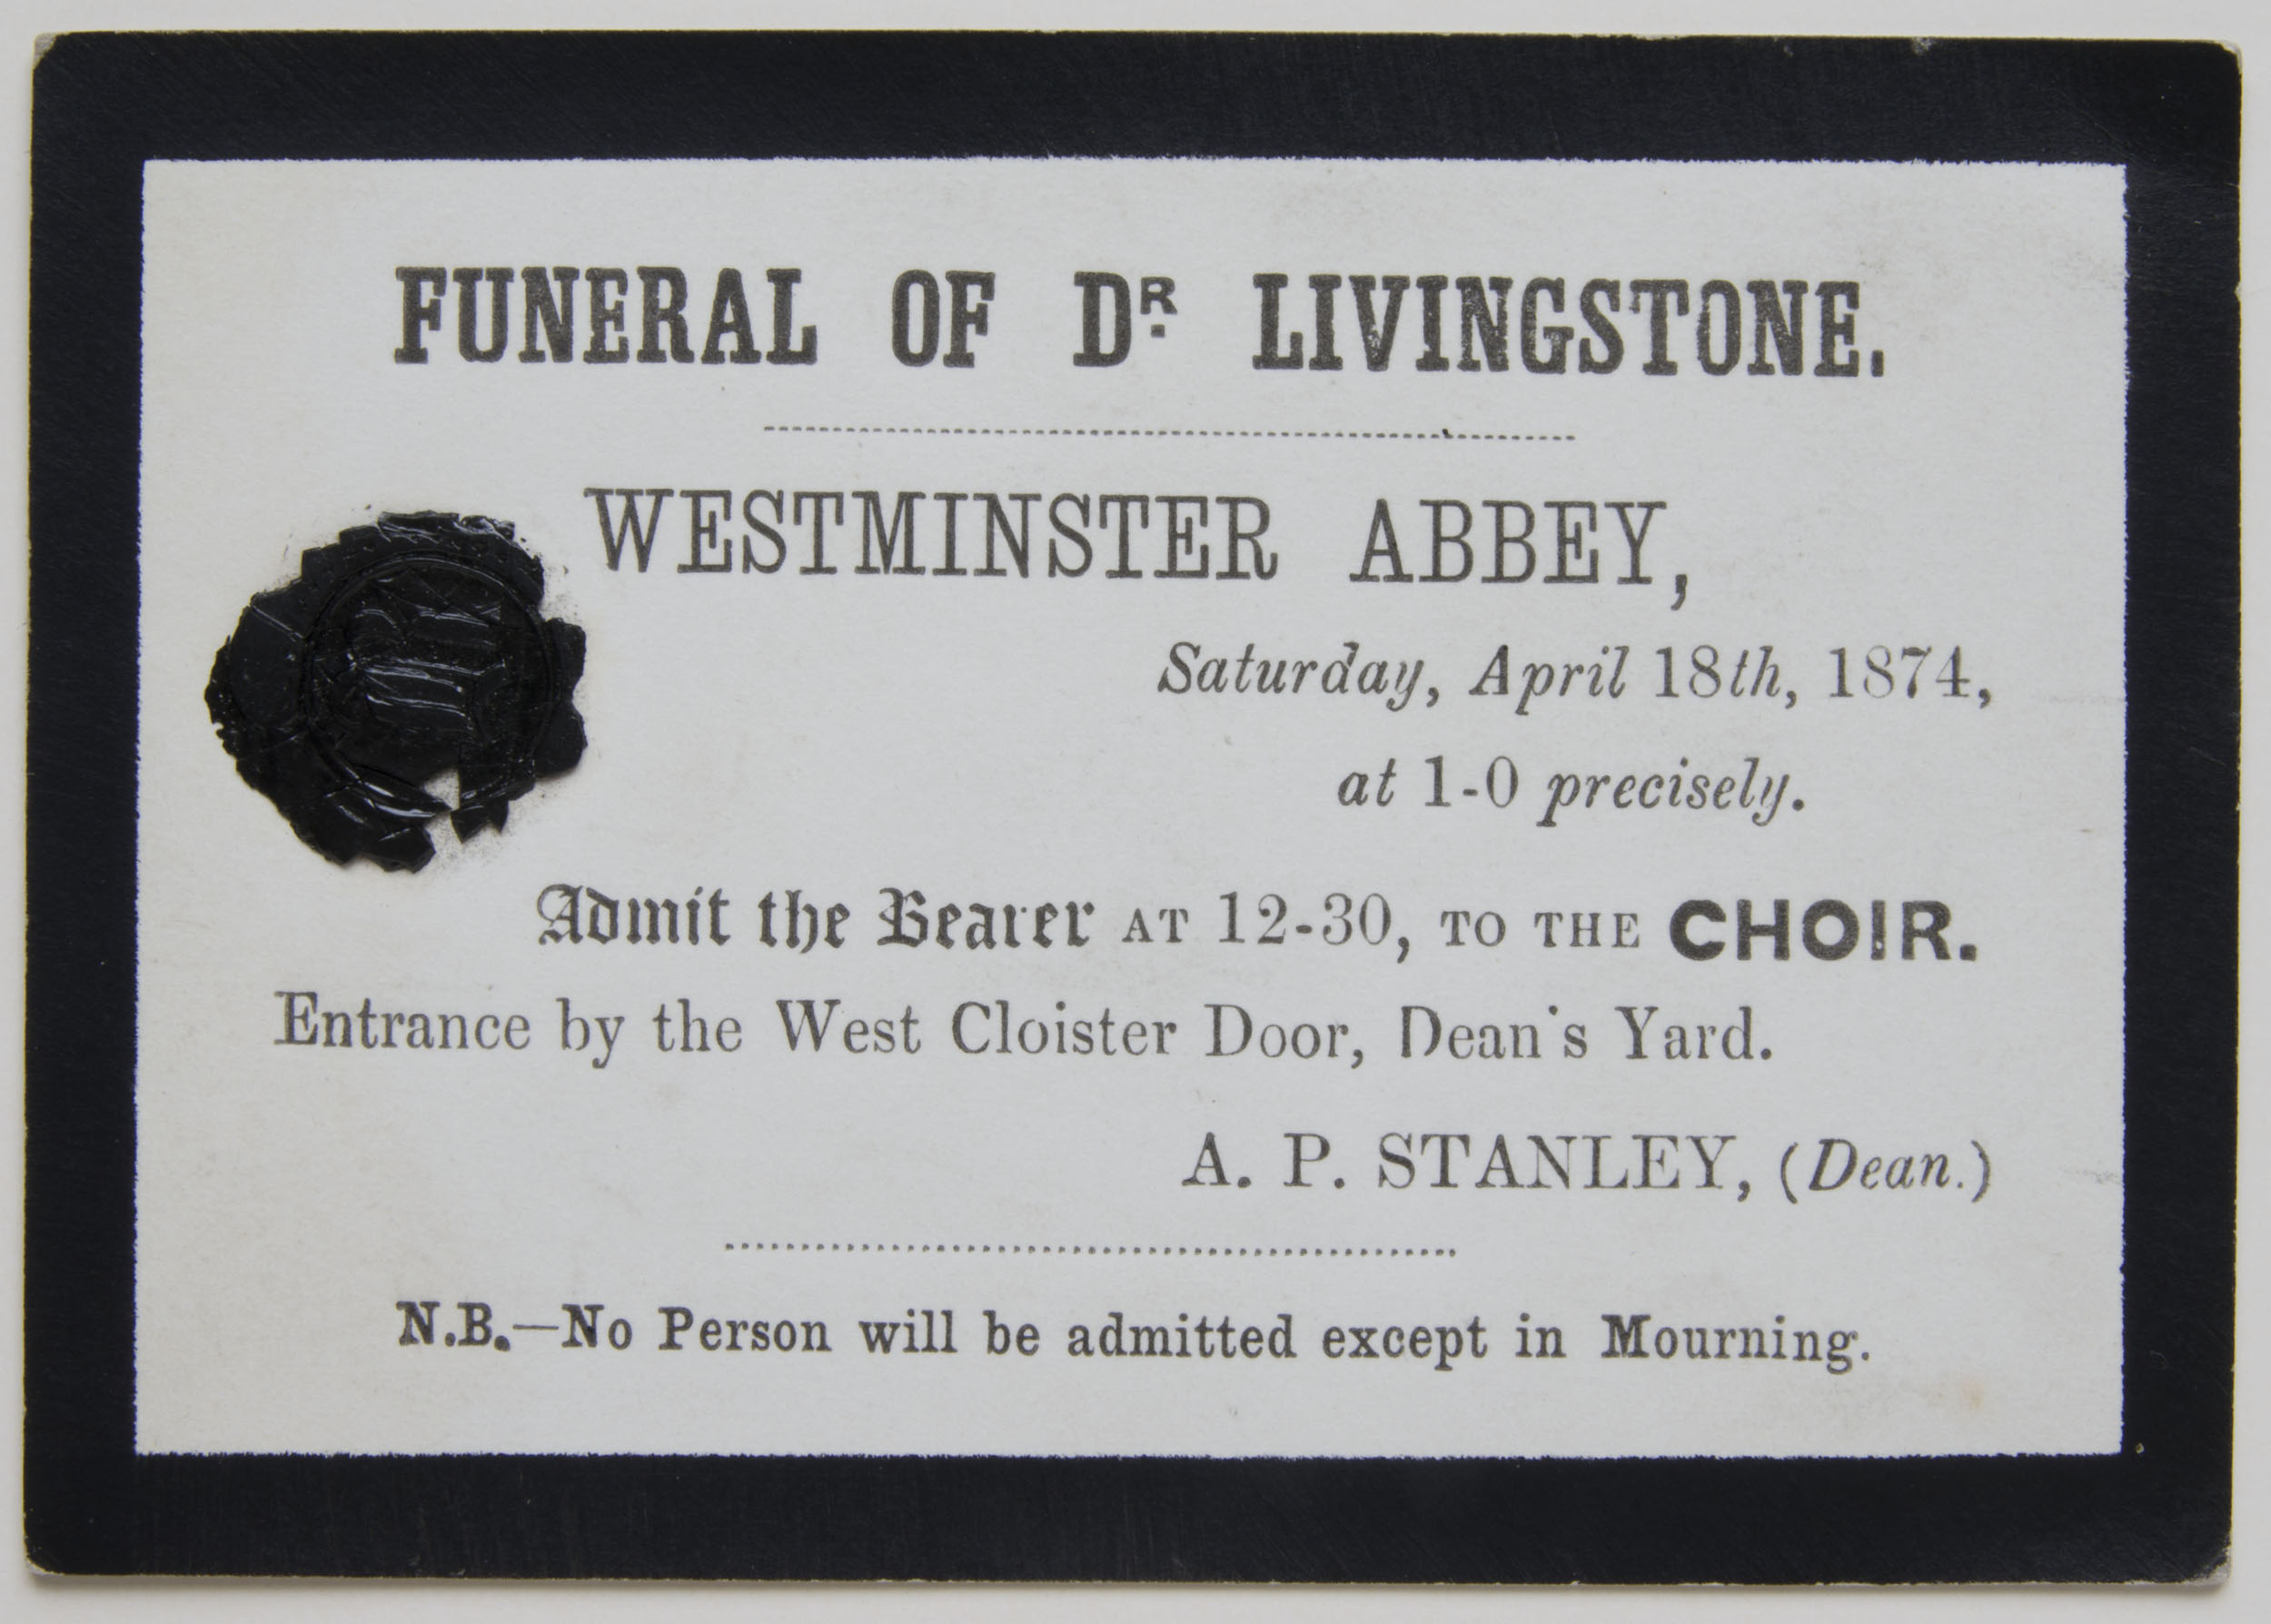 David Livingstone Funeral Ticket for Westminster Abbey (Choir), April 1874. Copyright David Livingstone Centre. Creative Commons Attribution-NonCommercial 3.0 Unported (https://creativecommons.org/licenses/by-nc/3.0/).